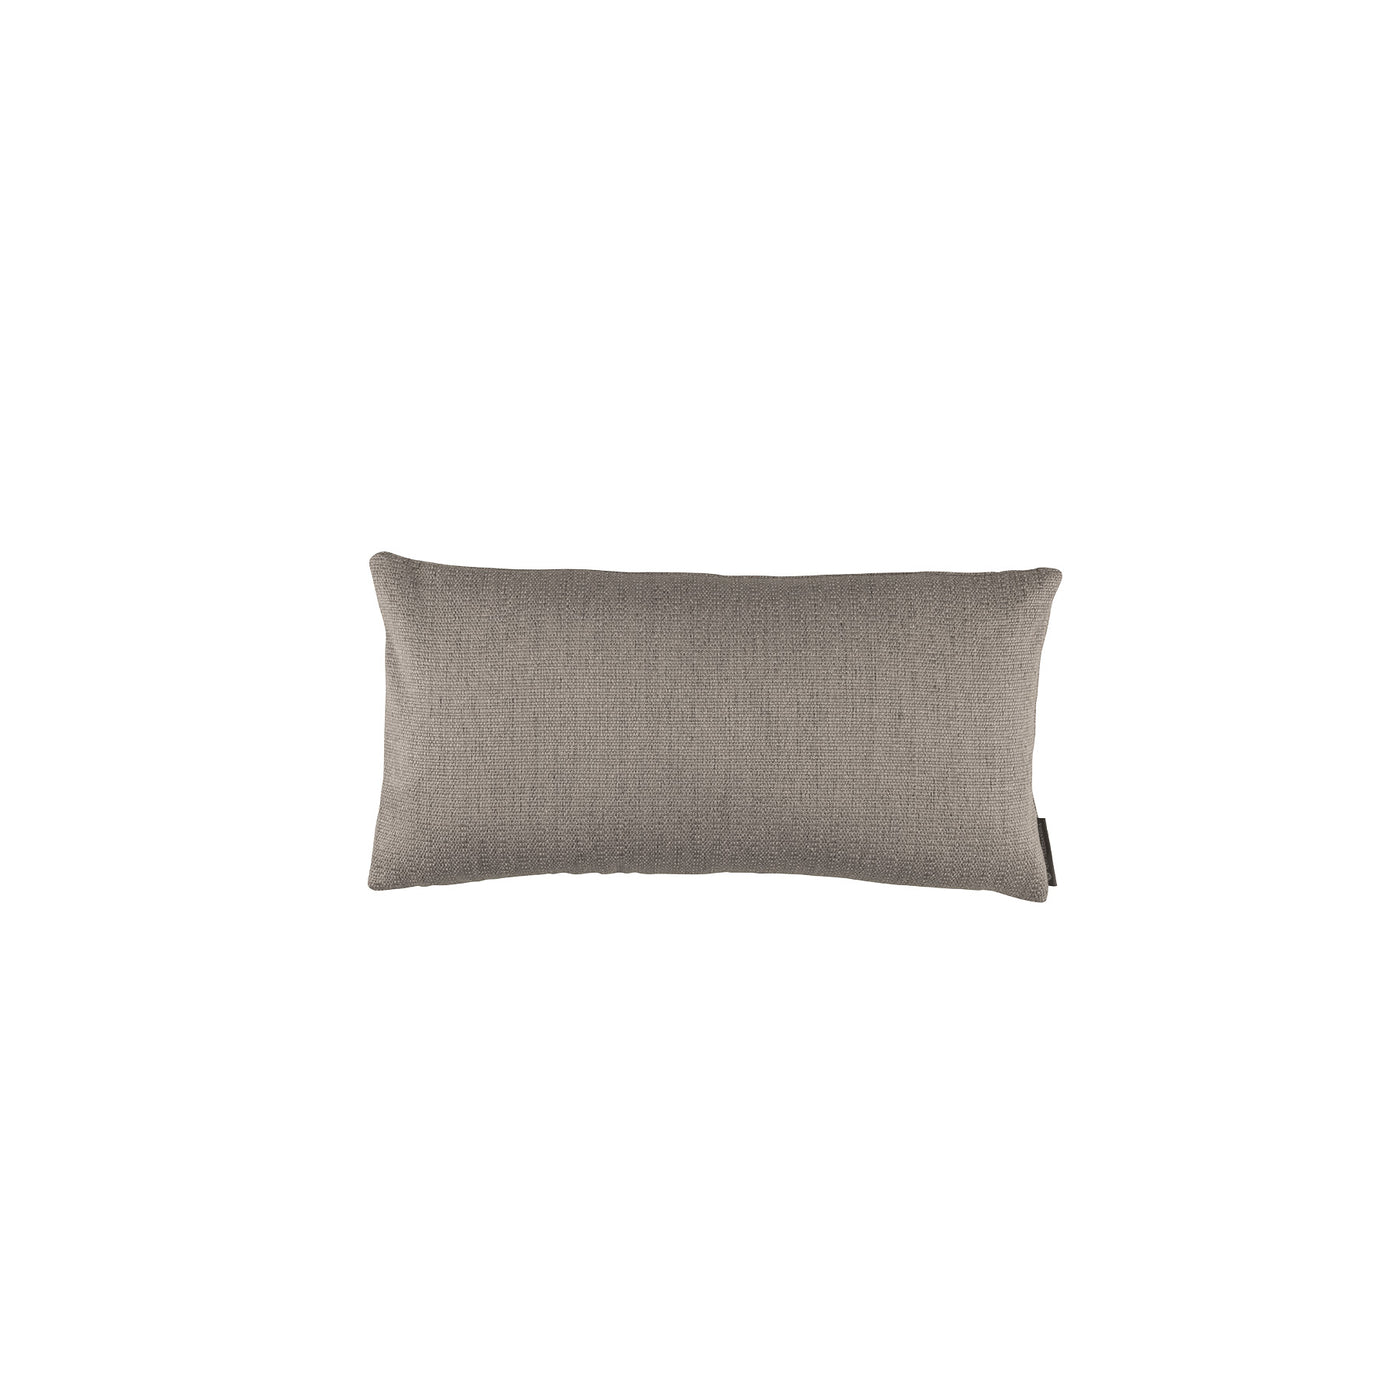 Liam Fawn Small Rectangle Pillow (12x24)